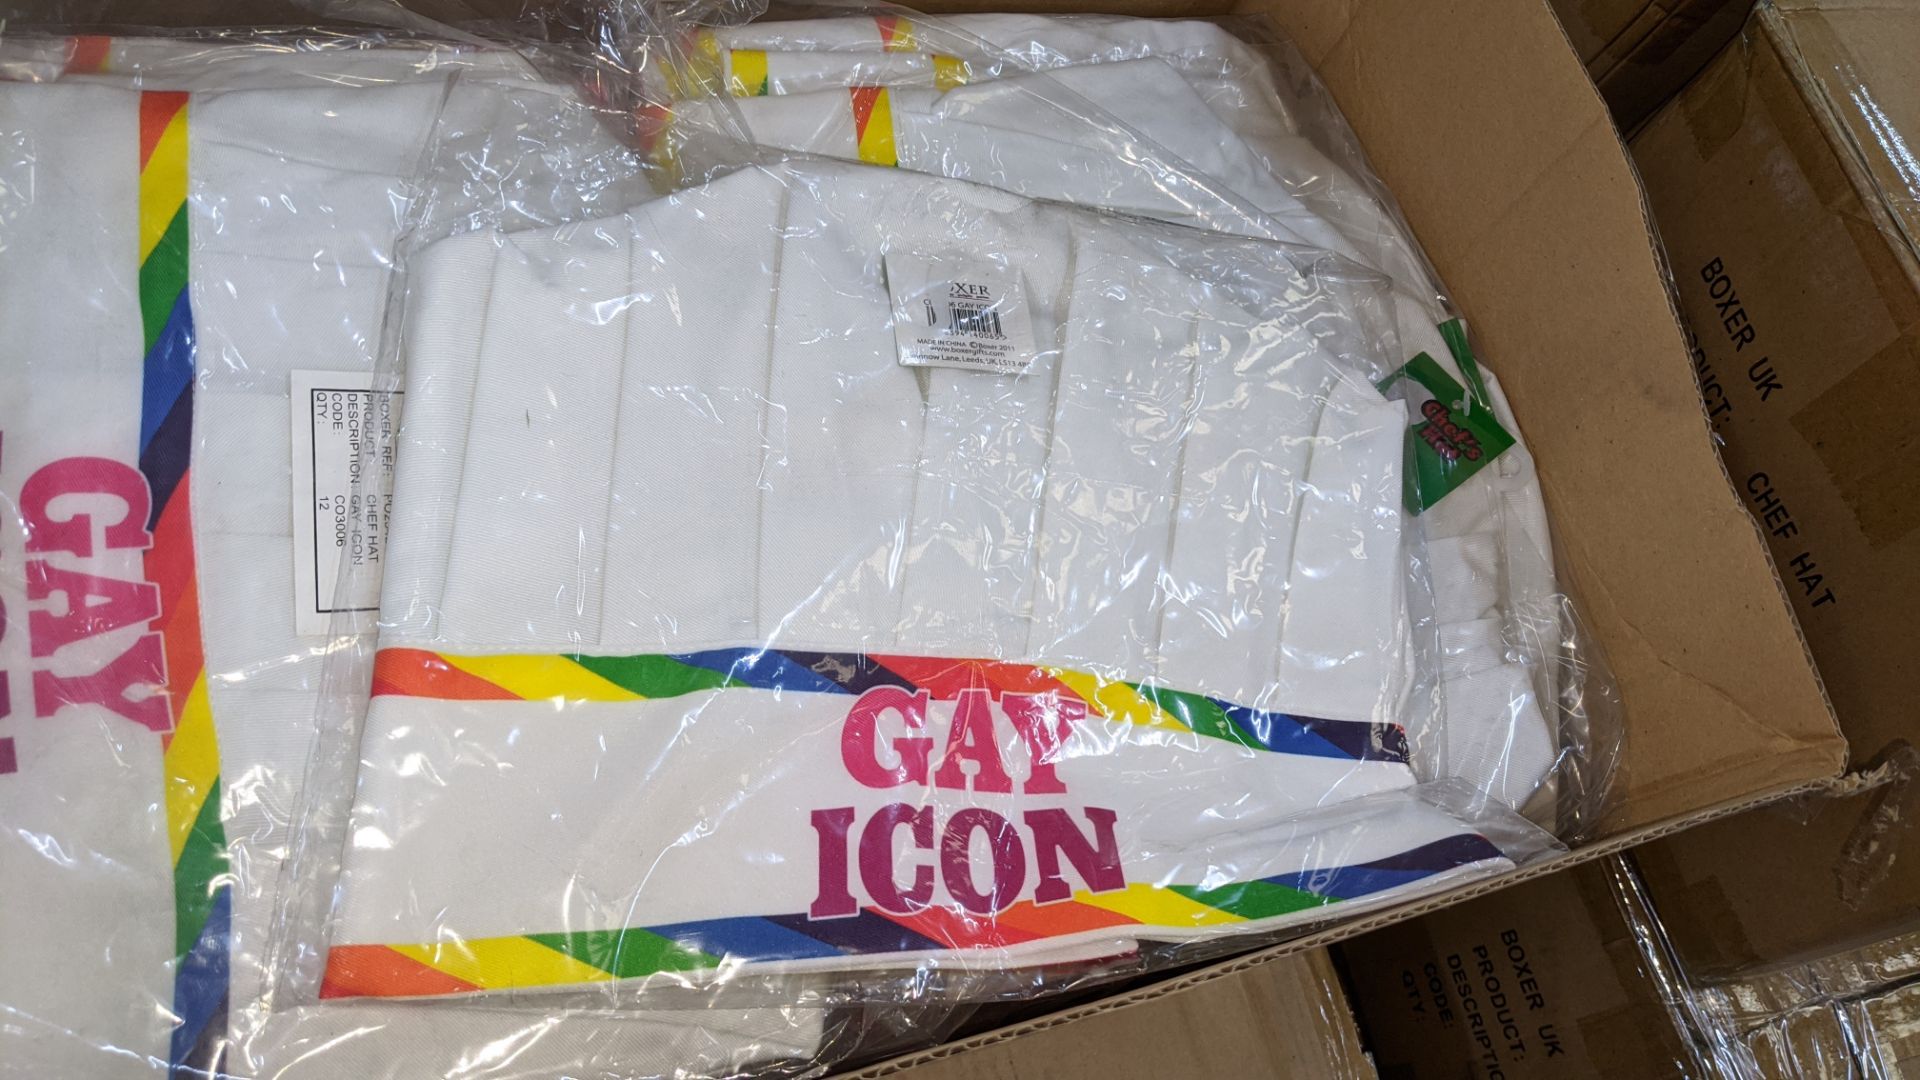 361 off Gay Icon chef's hats, individually bagged & tagged, in a total of 4 outer cartons - Image 3 of 6